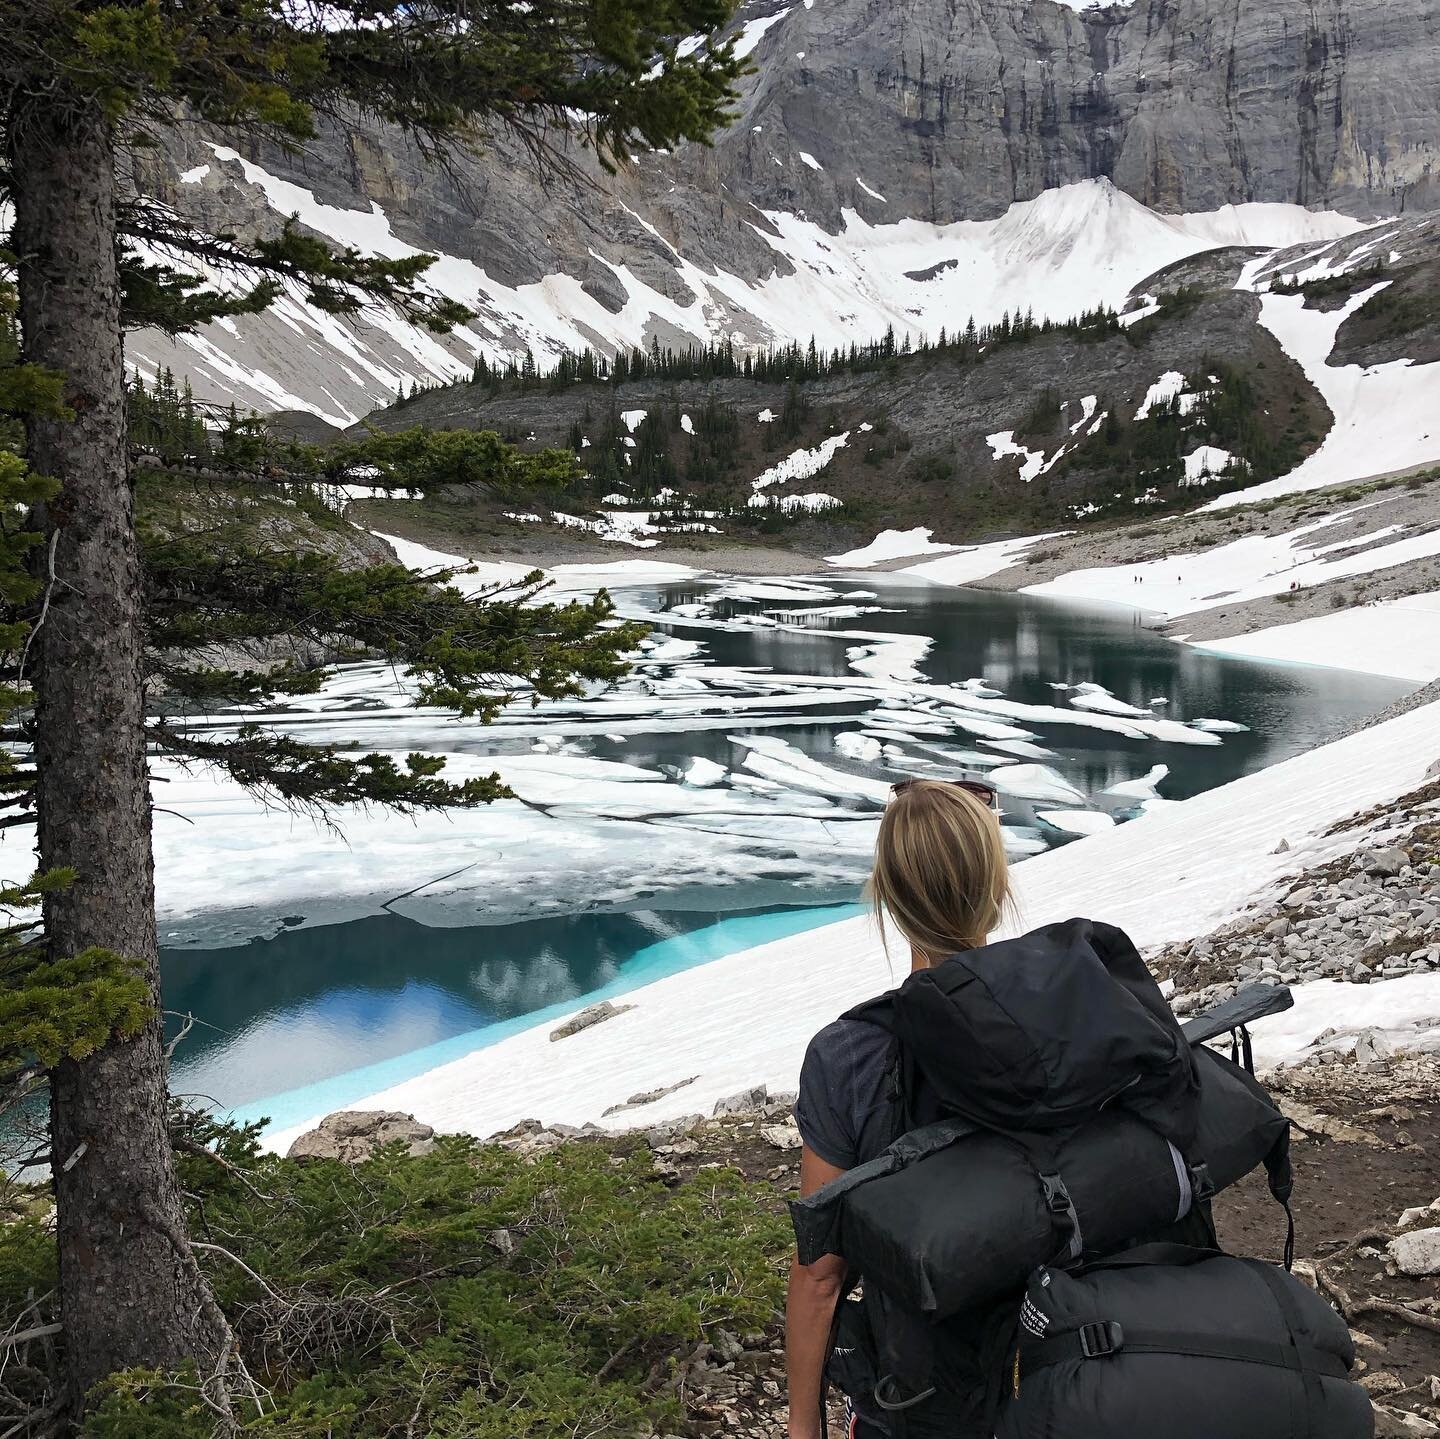 This is how I met my partner in crime! We decided to go backcountry hiking as our date&hellip;.not typical but why I loved every minute of it. This will always be my favourite hike!!